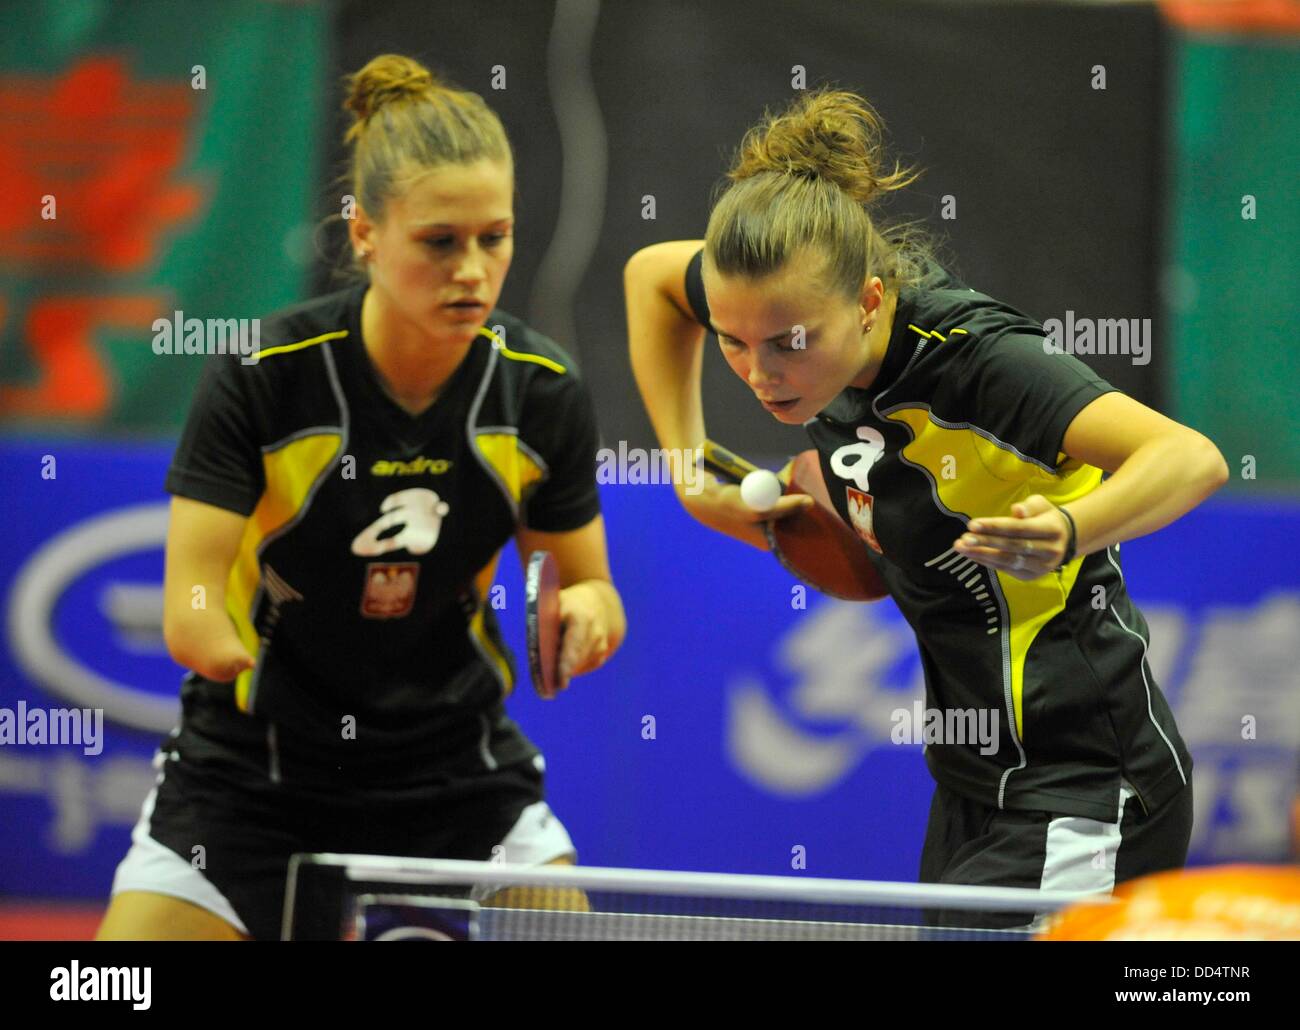 Katarzyna Grzybowska (right) and Natalia Partyka (left) of Poland in action during the finals of women's doubles against Linda Creemers and Li Jiao from Netherlands during the World Tour tournament in Olomouc, Czech Republic, August 25, 2013. (CTK Photo/Ludek Perina) Stock Photo